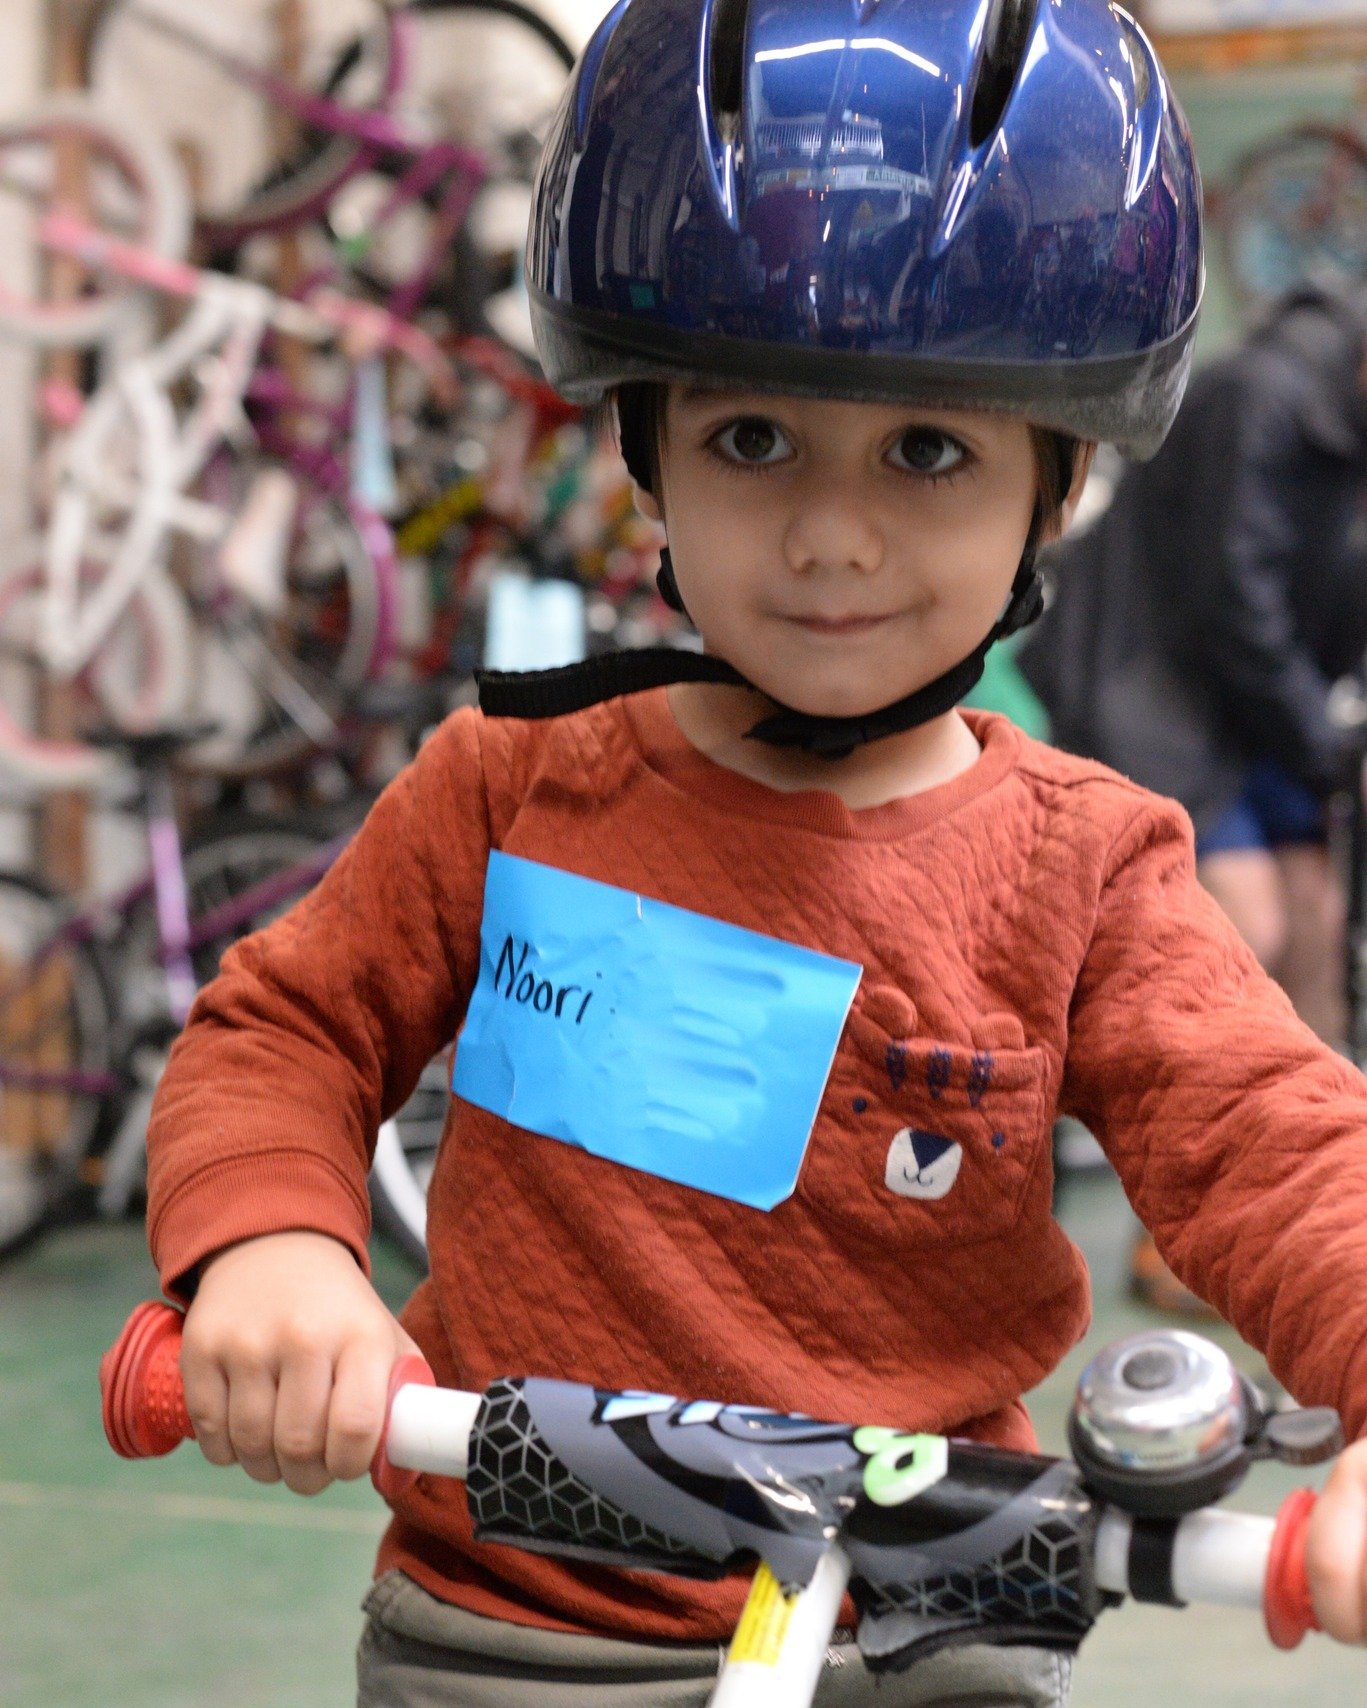 Help your child roll into summer vacation by picking out a newly refurbished bike with them at our Kids Bike Sale May 24 and May 25! 

Thanks to support from the St. Luke's Community Health Improvement Fund, Boise Bicycle Project sells kids bikes at 